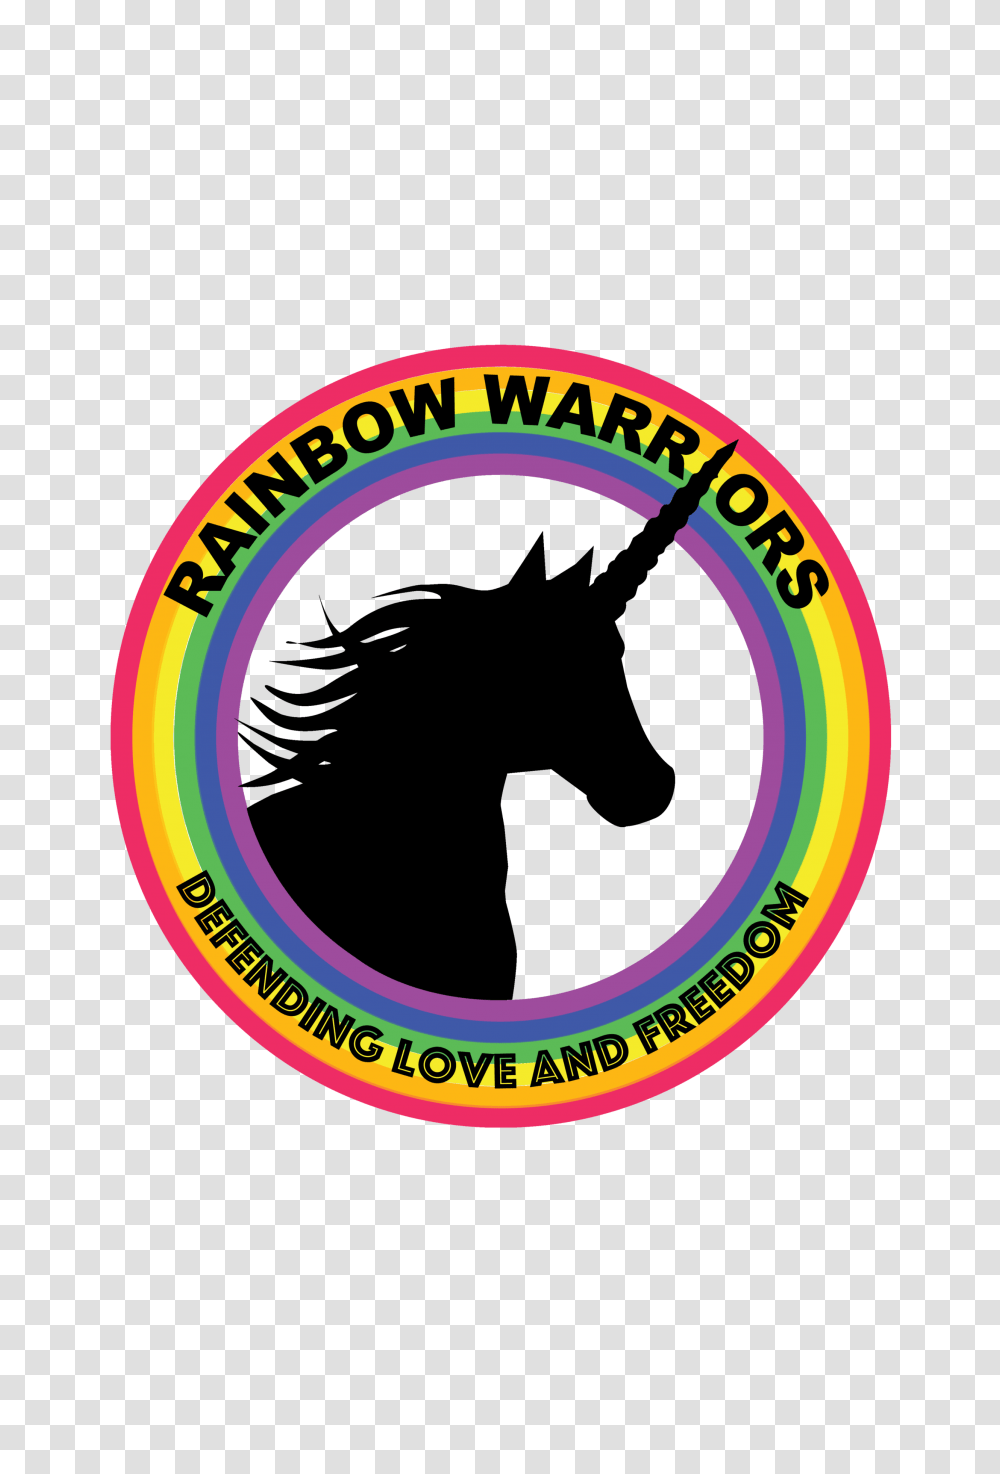 Rainbow Warriors Poster Buddha Mag, Frisbee, Toy, Label Transparent Png